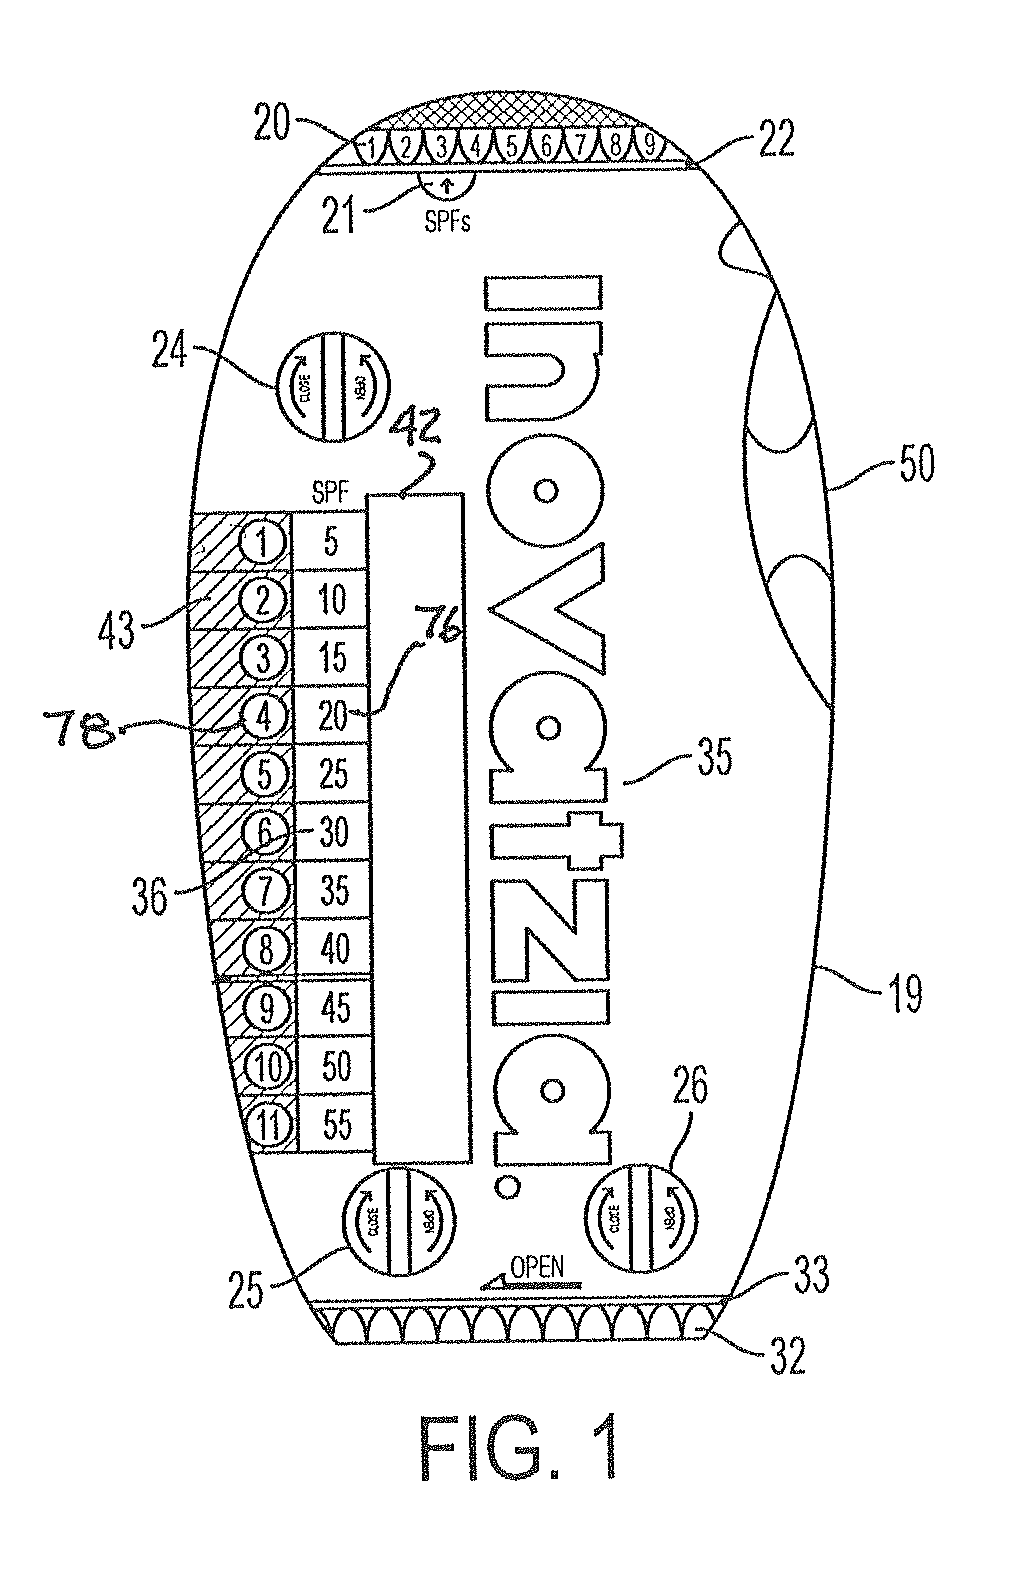 Fluid mixing and dispensing container